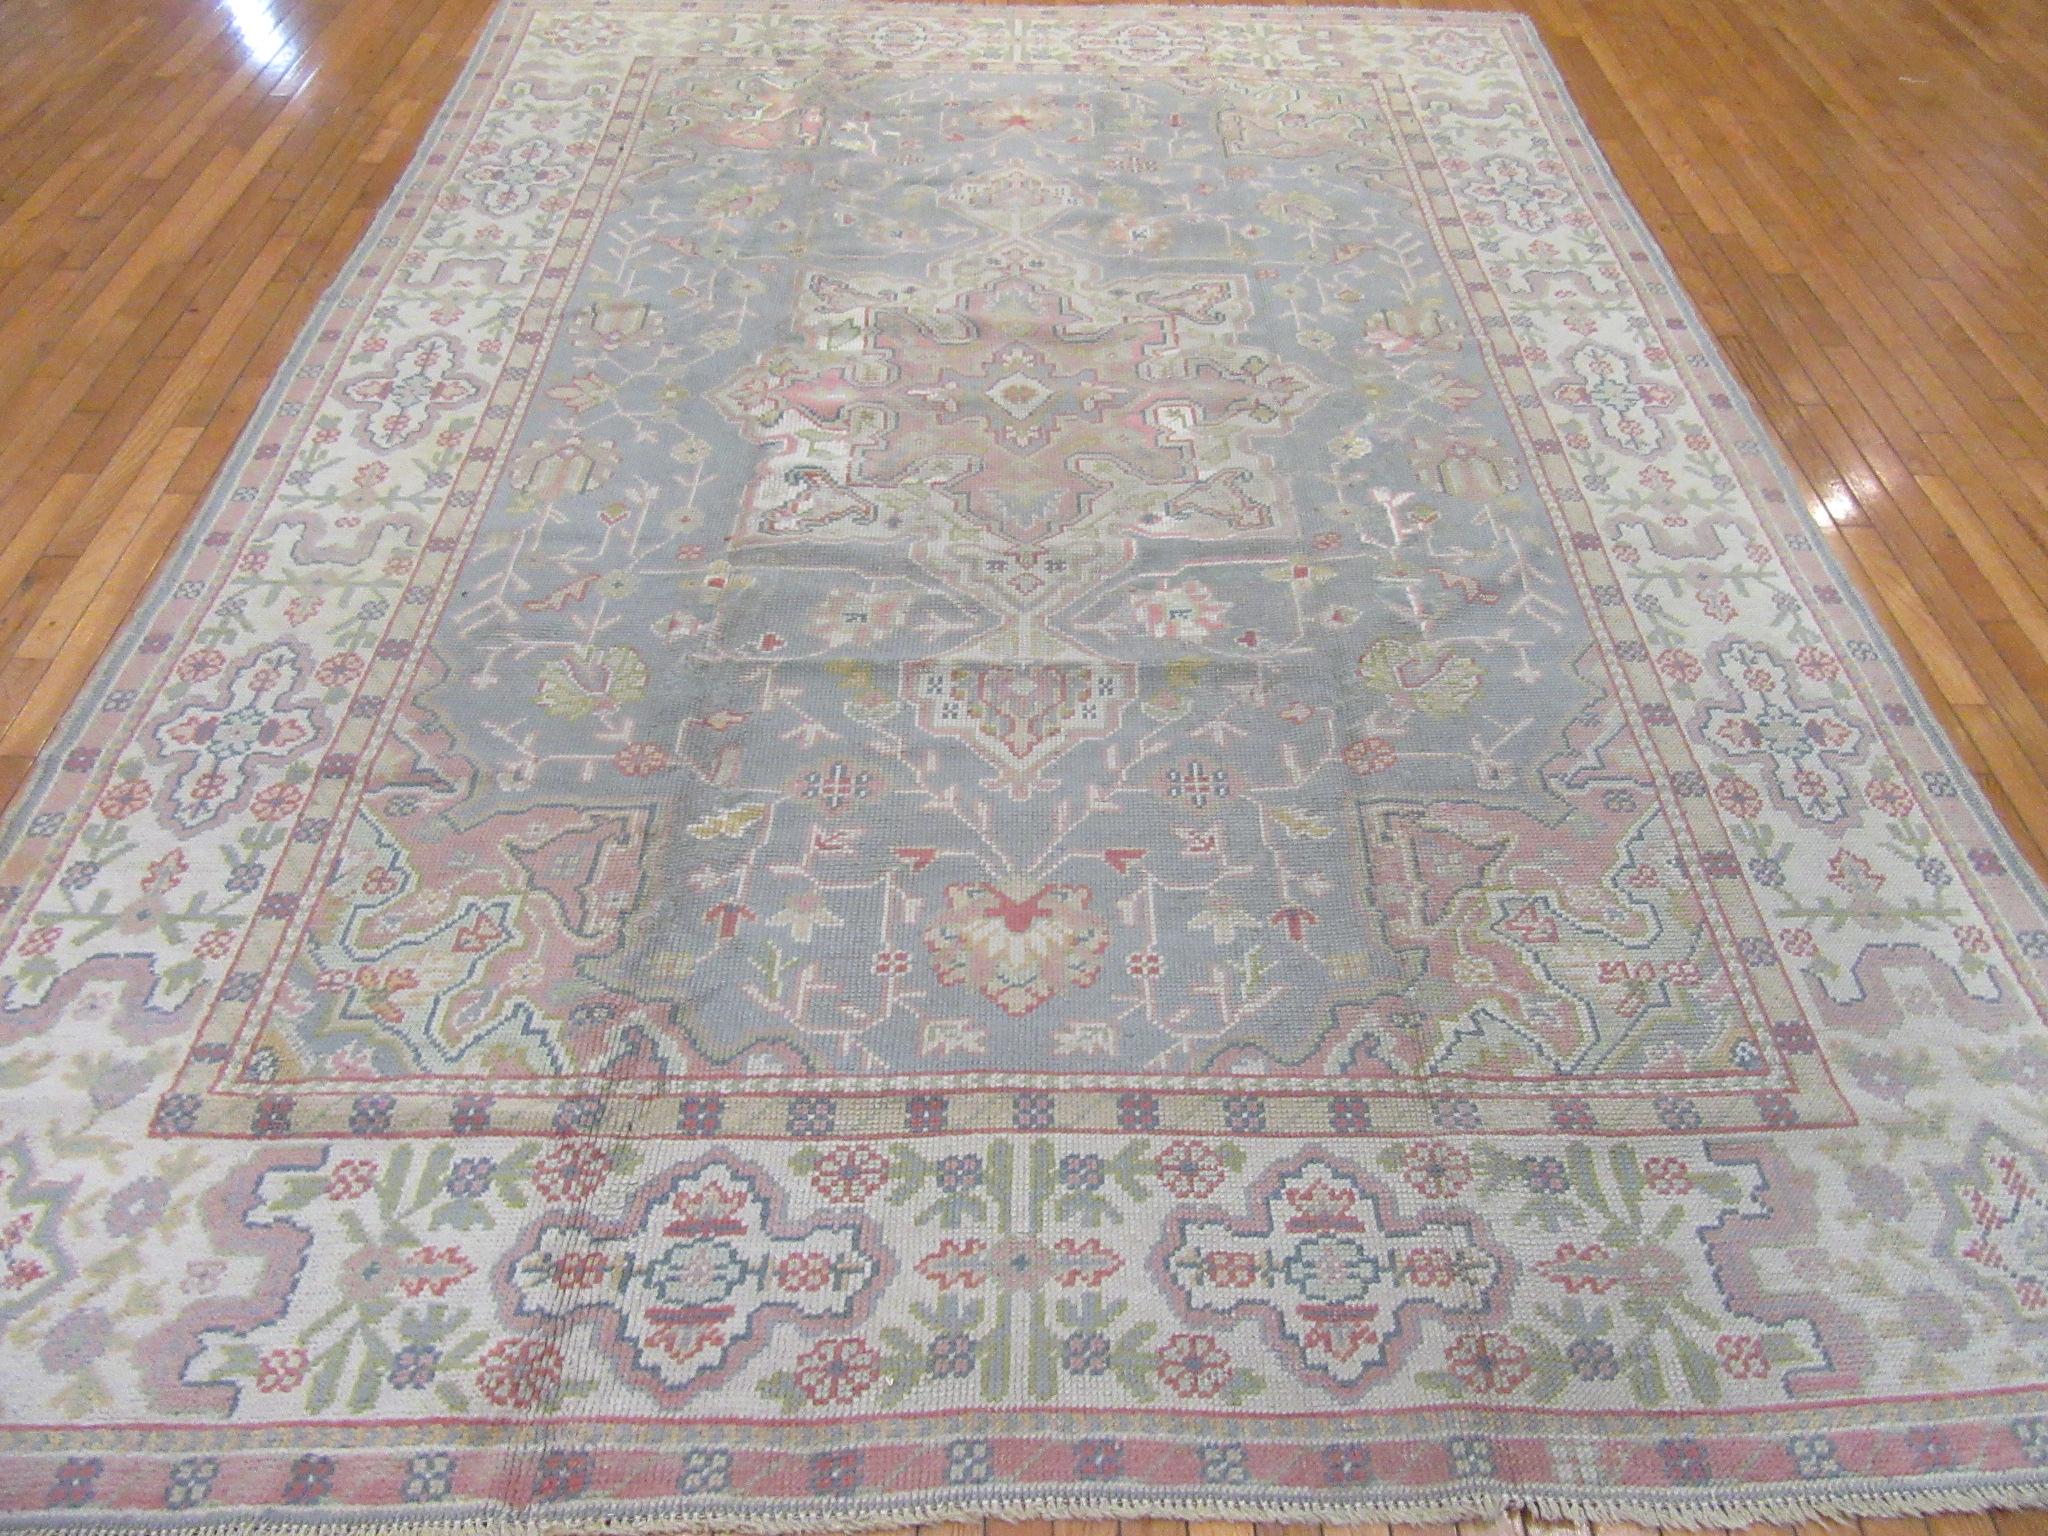 This is a hand-knotted room size 8' 1'' x 11' 8'' antique Turkish Oushak rug with a unique color combination. This beautiful rug is in very good condition made with wool.